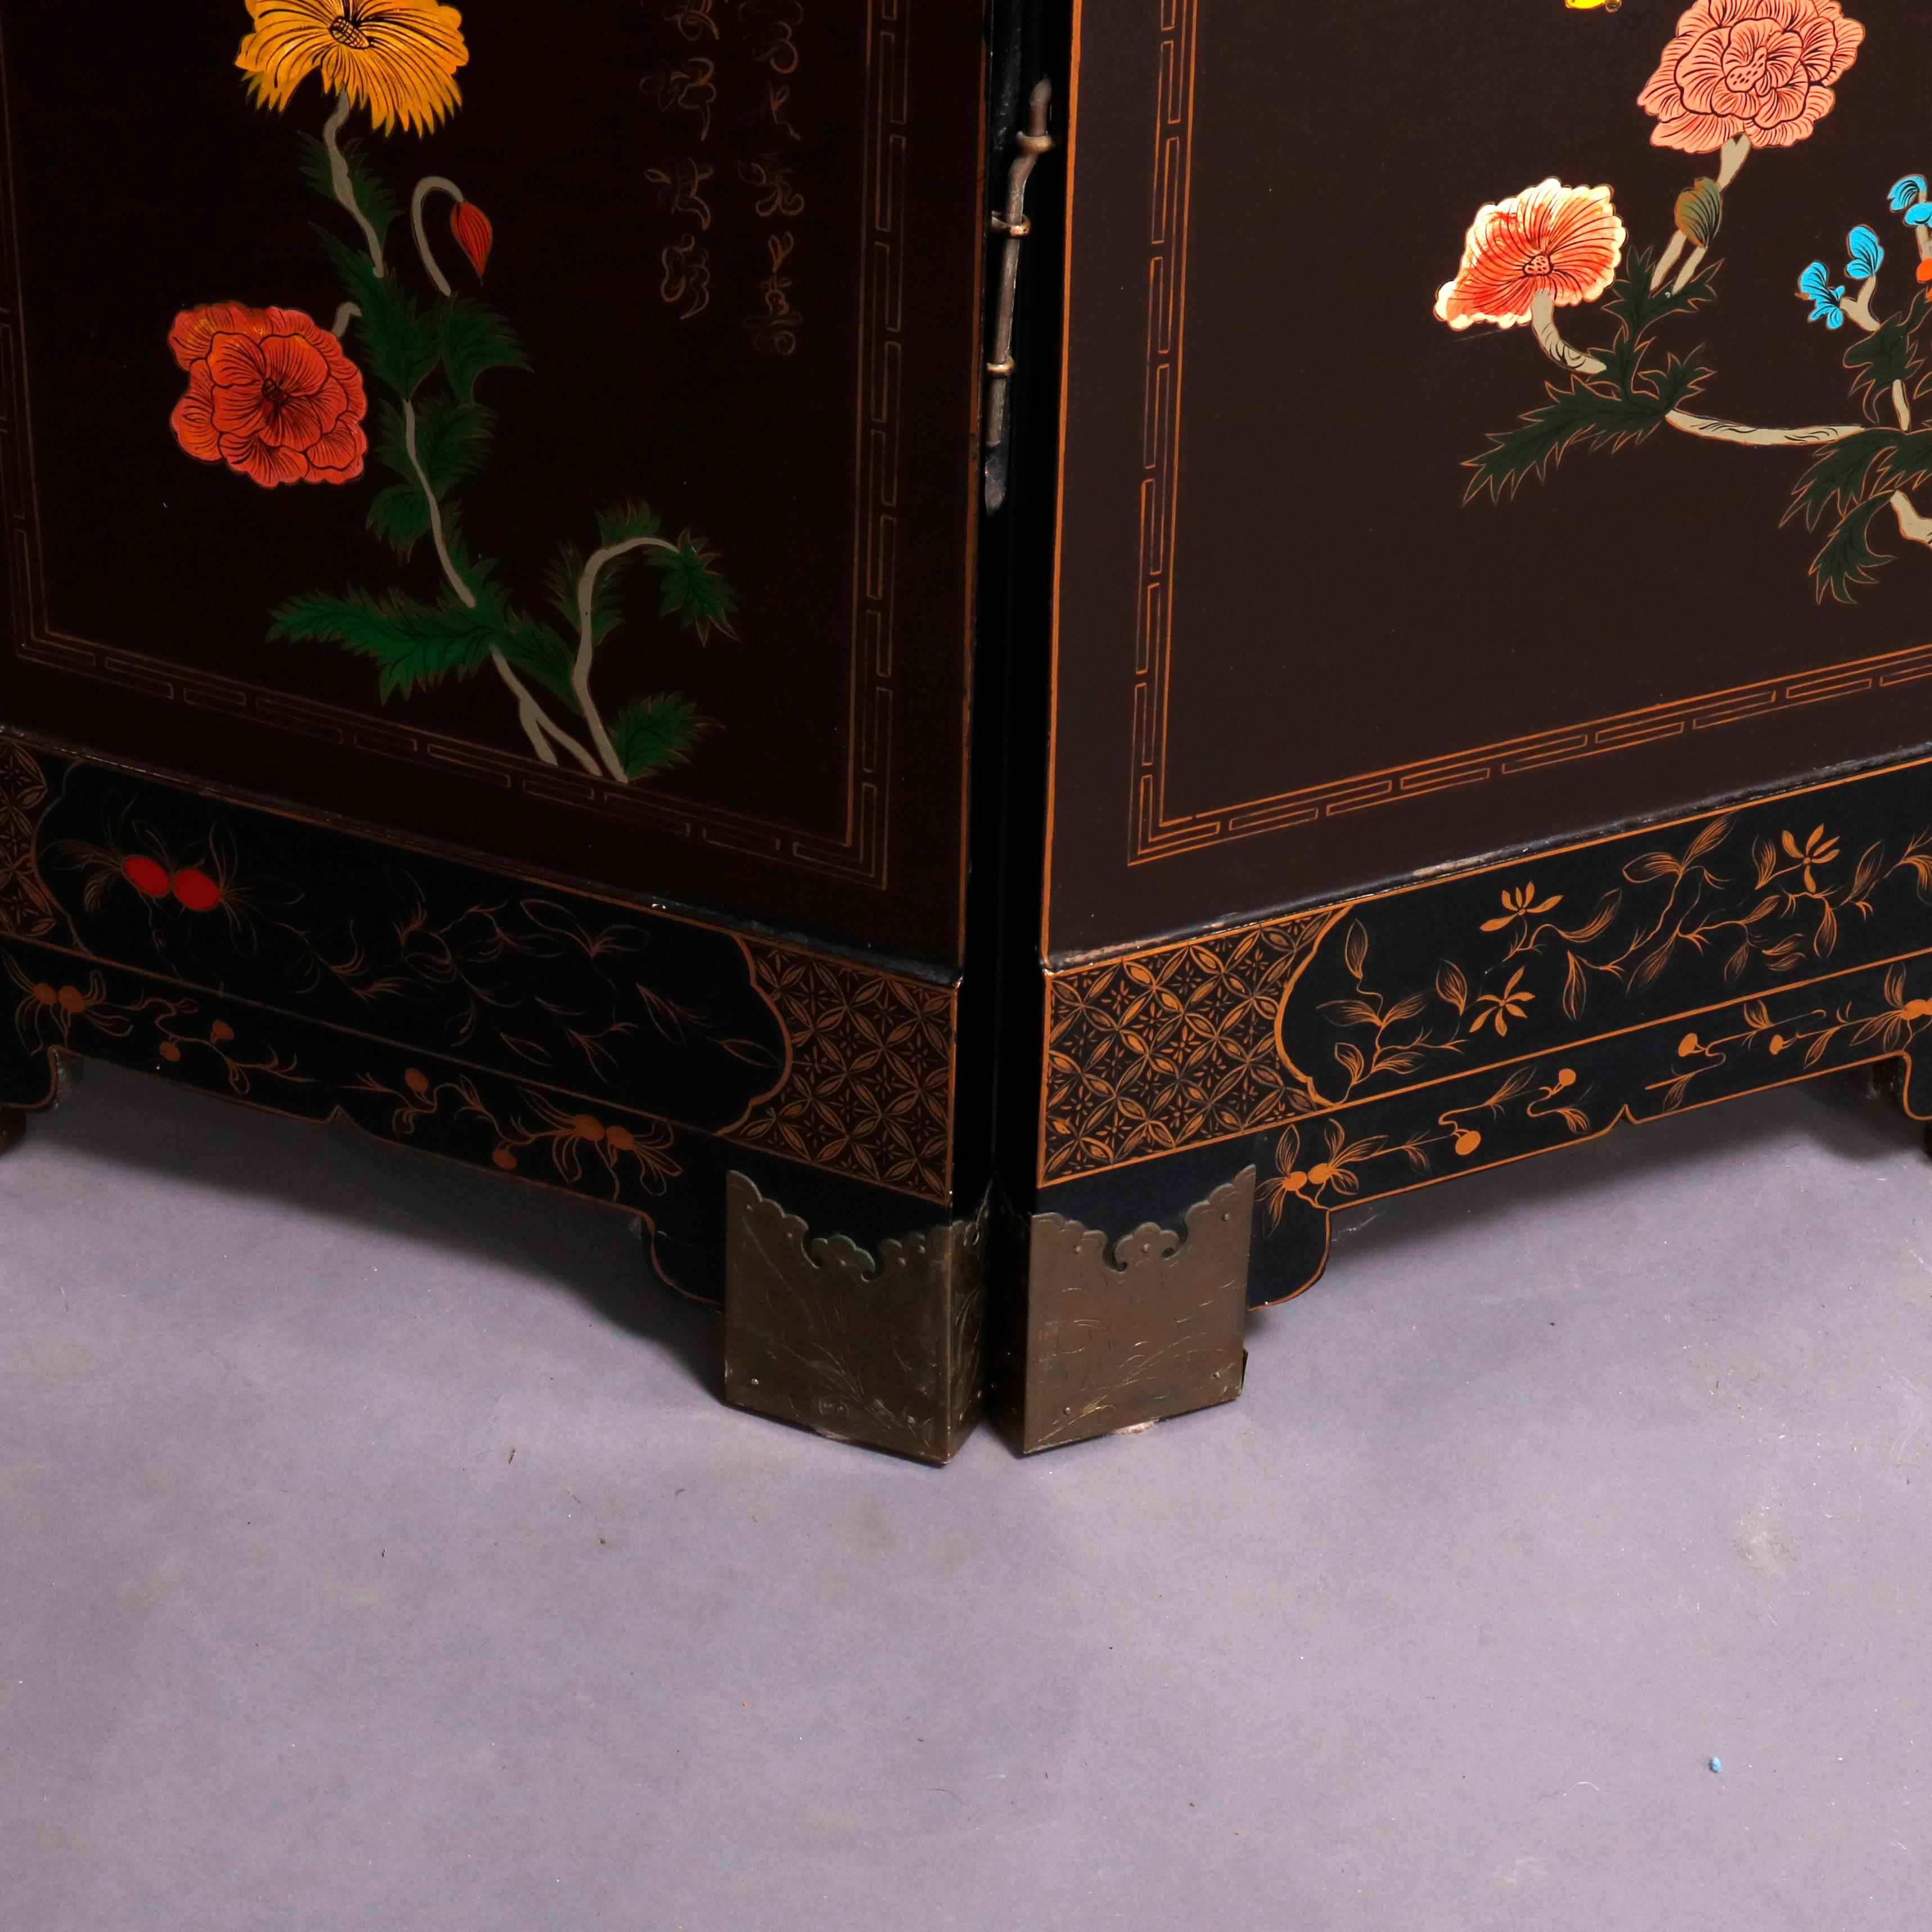 Chinese Six Chinoiserie Decorated Ebonized with Carved Hard Stone Screen Panels